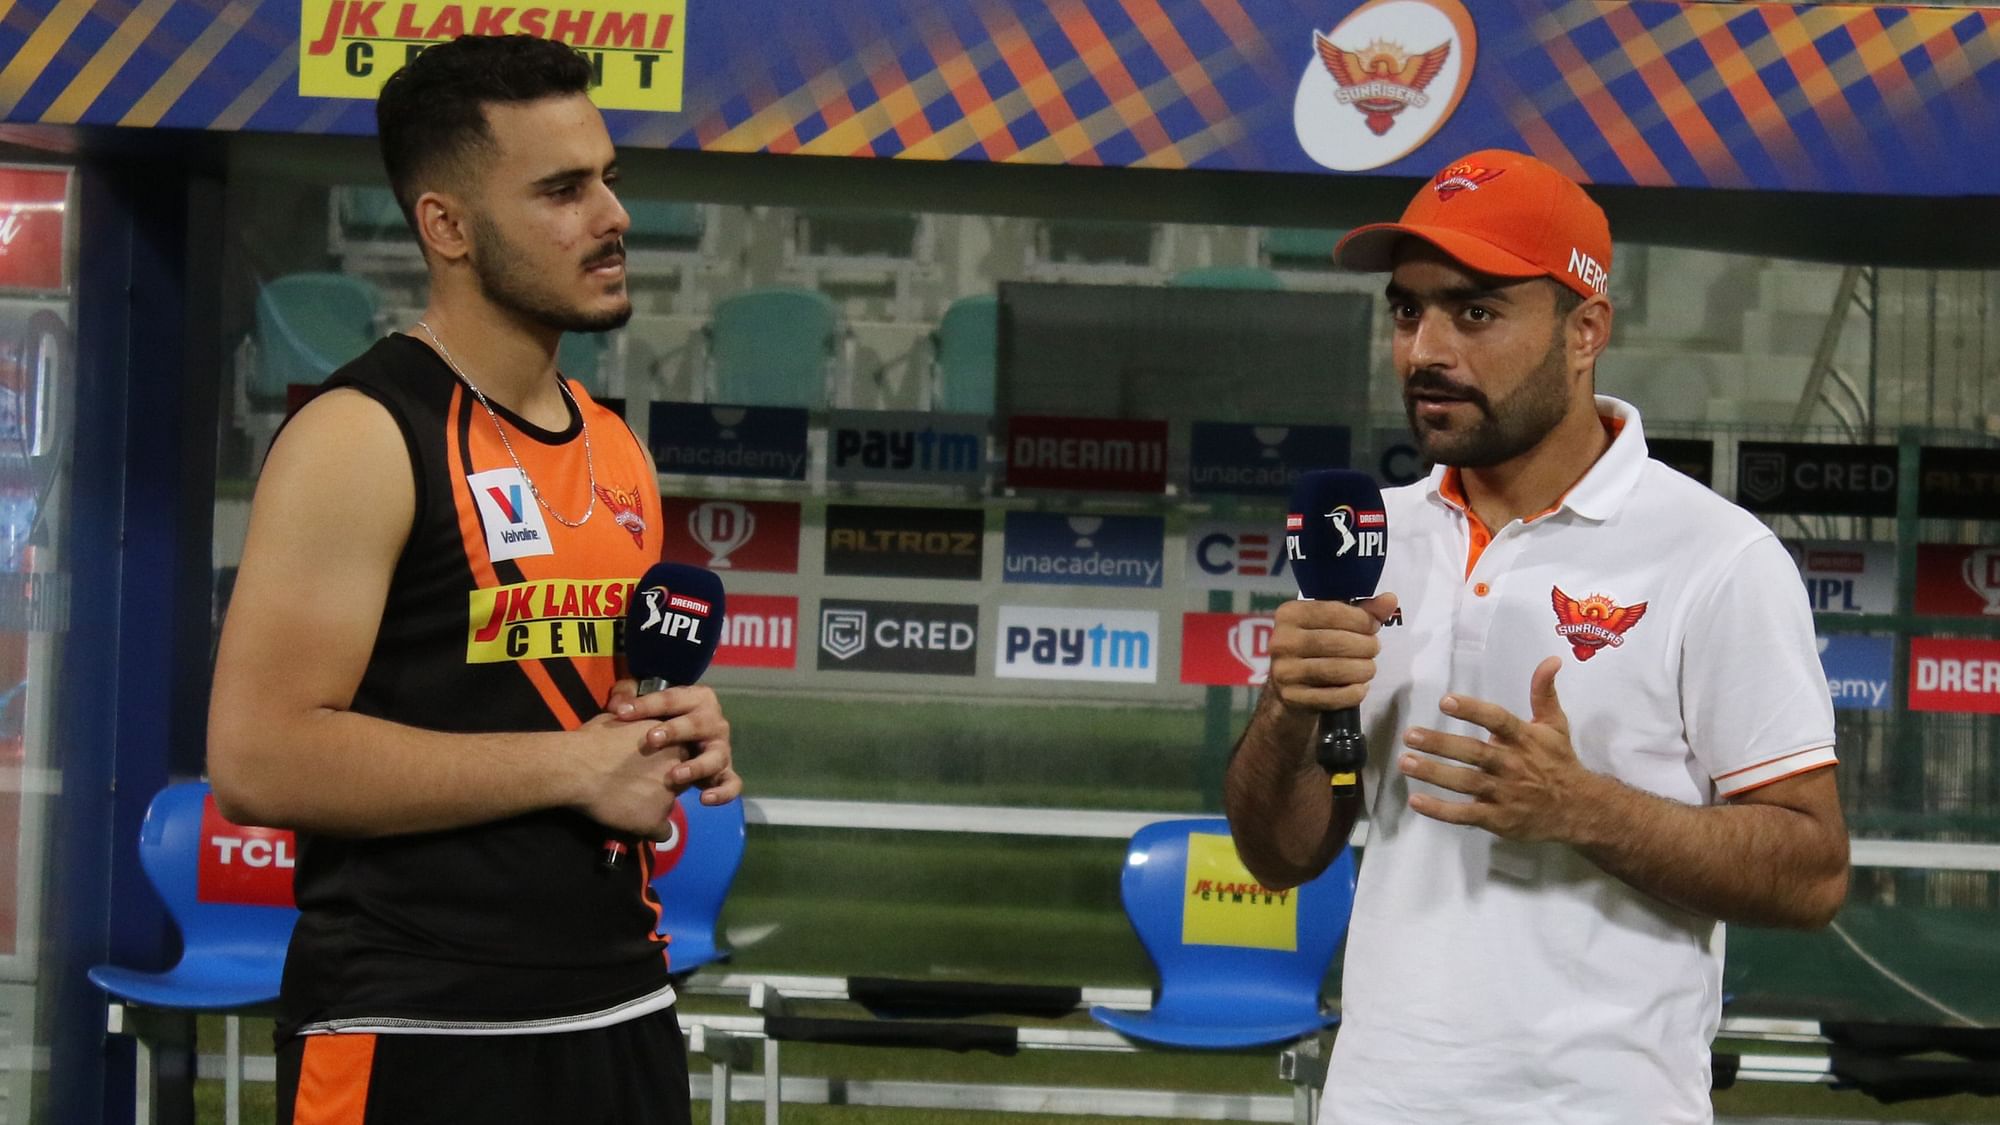 Rashid Khan in conversation with his teammate Abdul Samad after Sunrisers Hyderabad’s win against Delhi Capitals. 